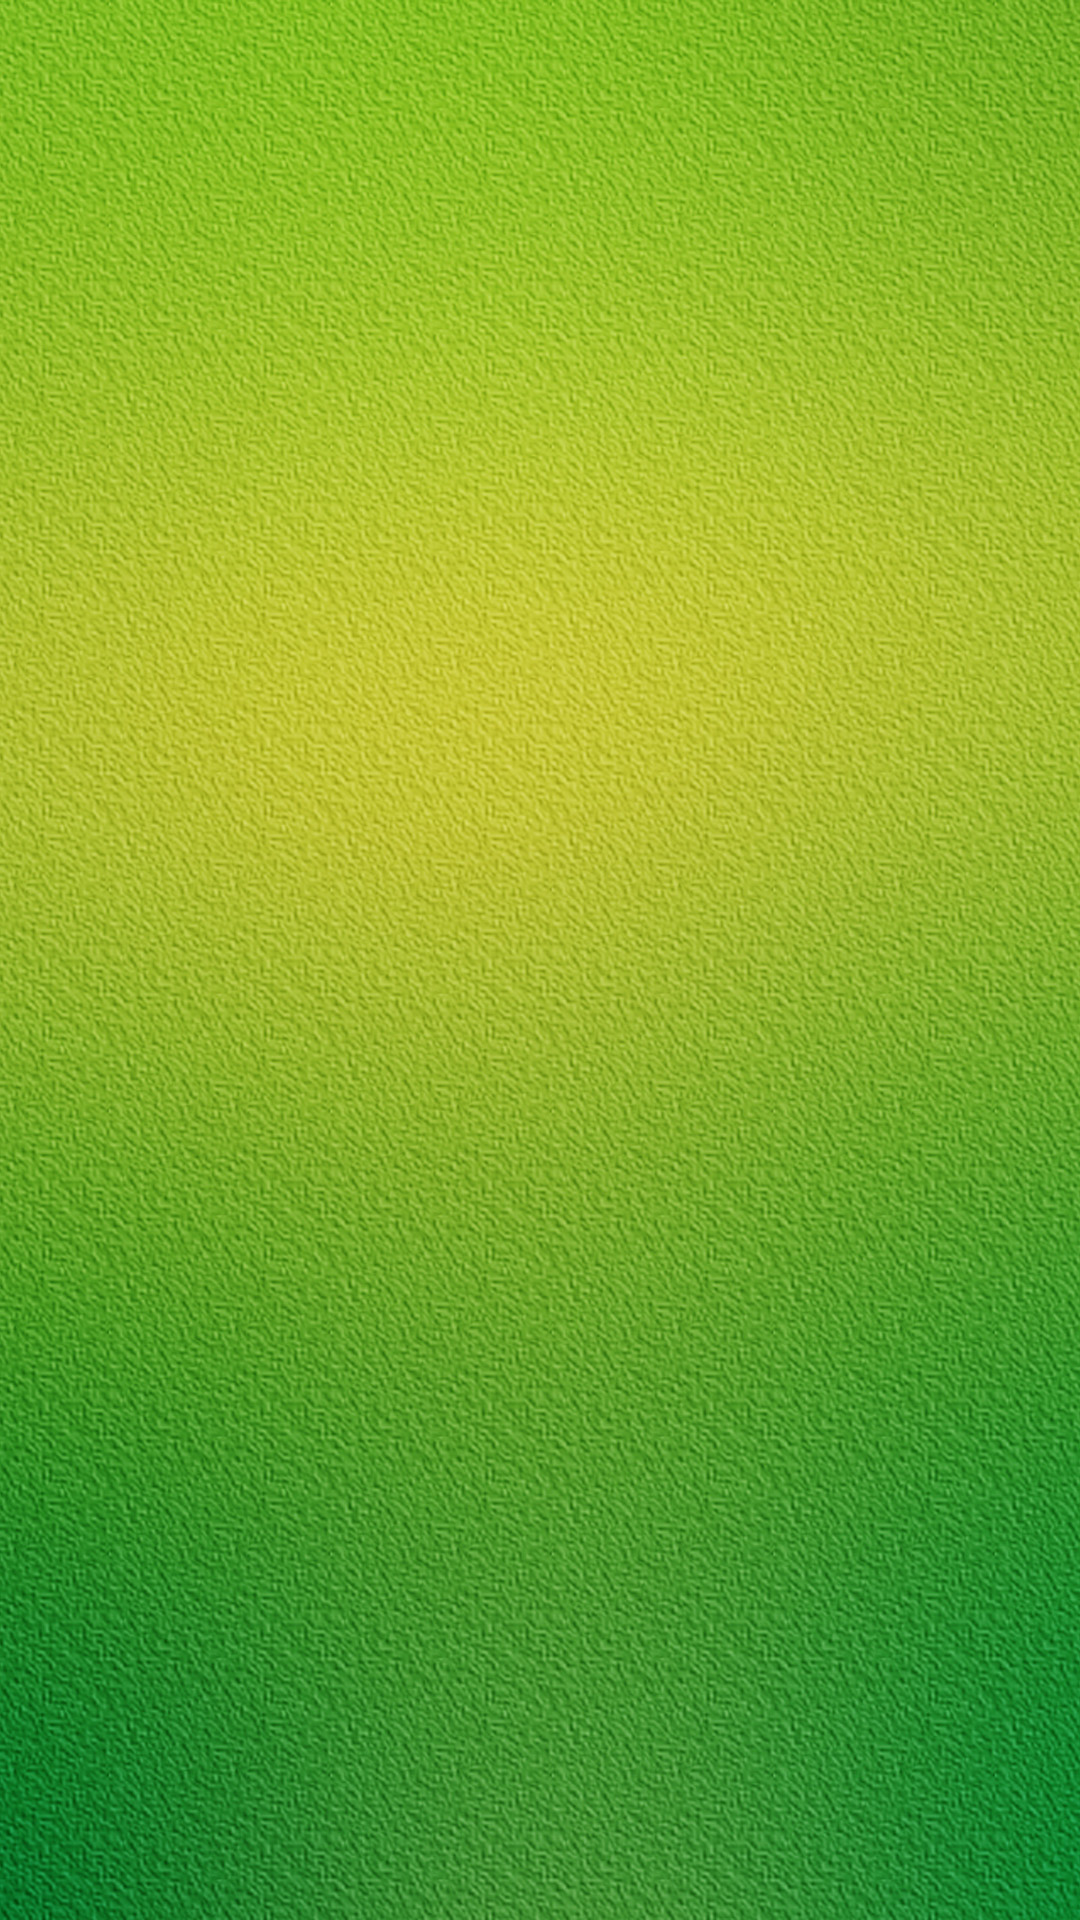 Green Grass Texture Wallpapers for Galaxy S5